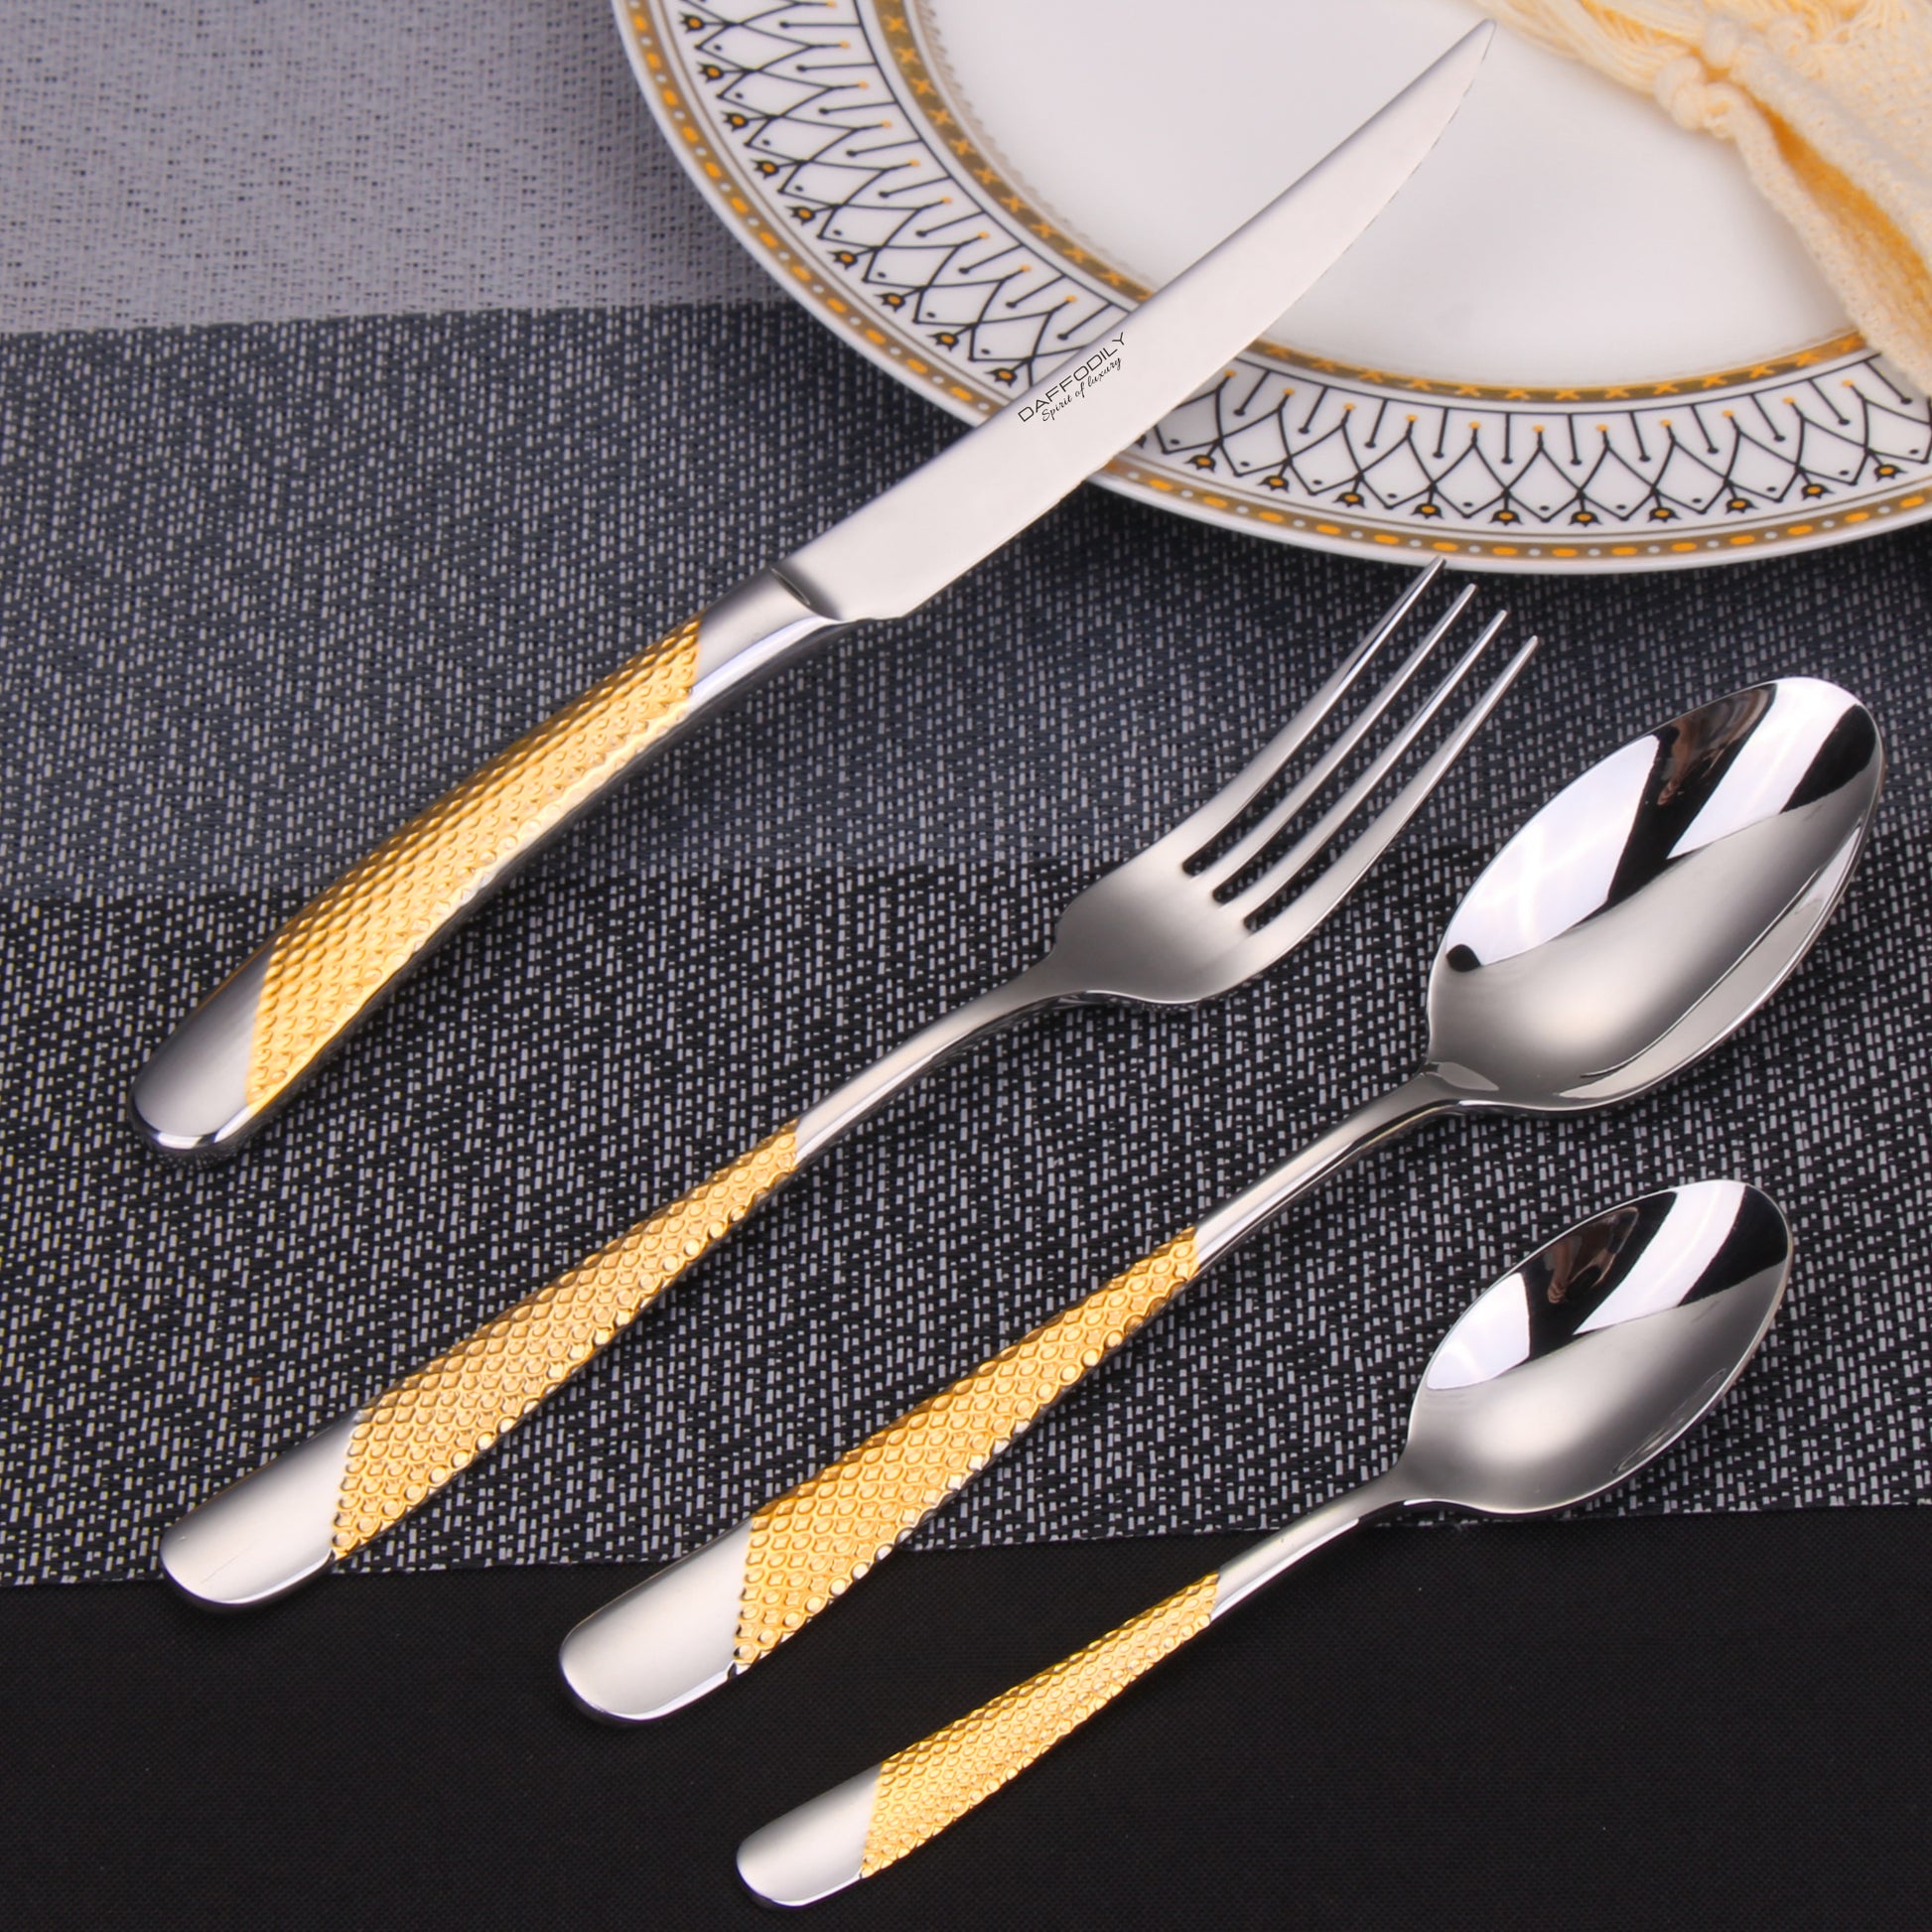 Vintage-inspired cutlery design with intricate patterns